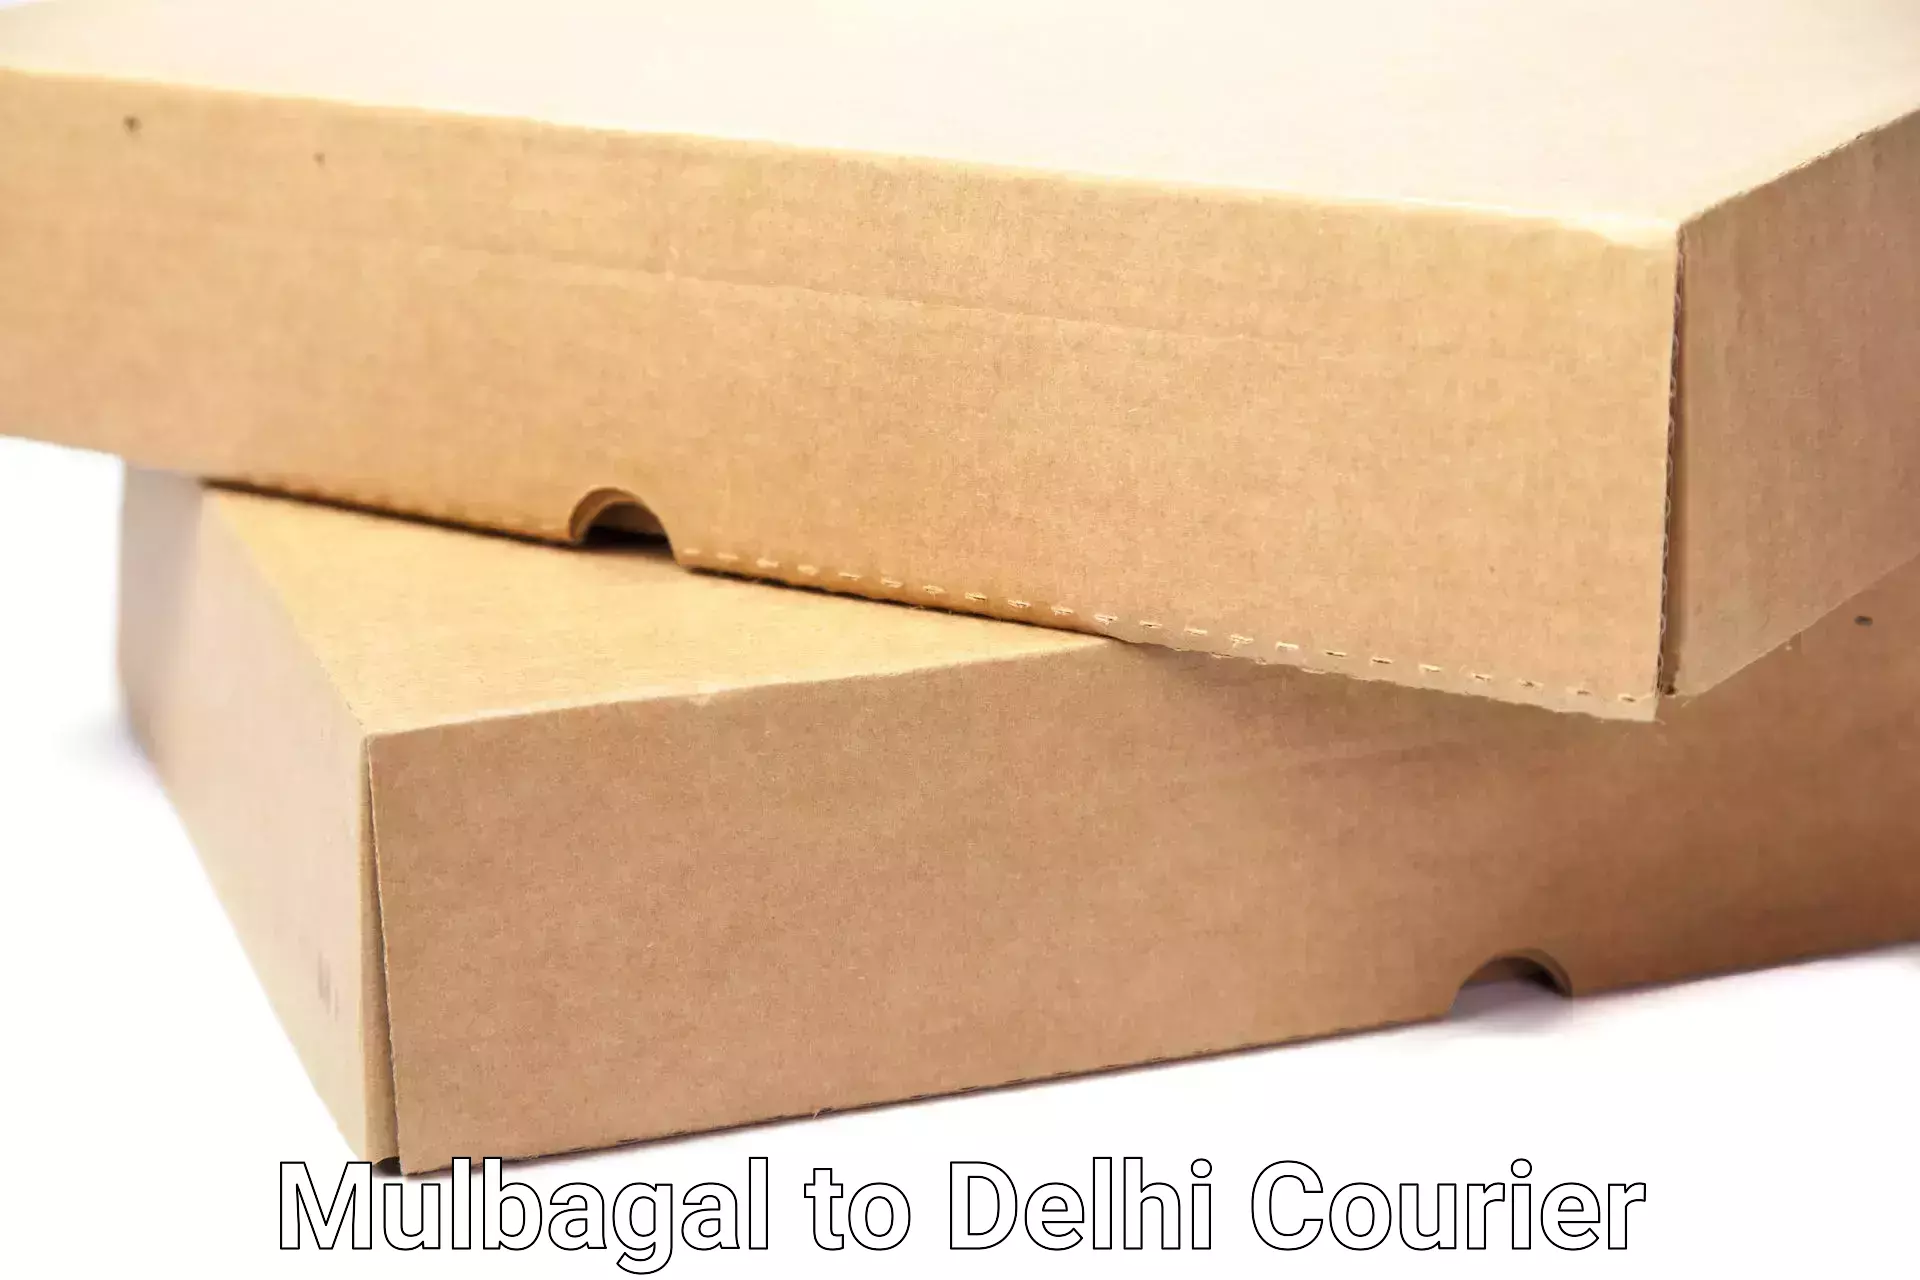 Furniture delivery service Mulbagal to Subhash Nagar